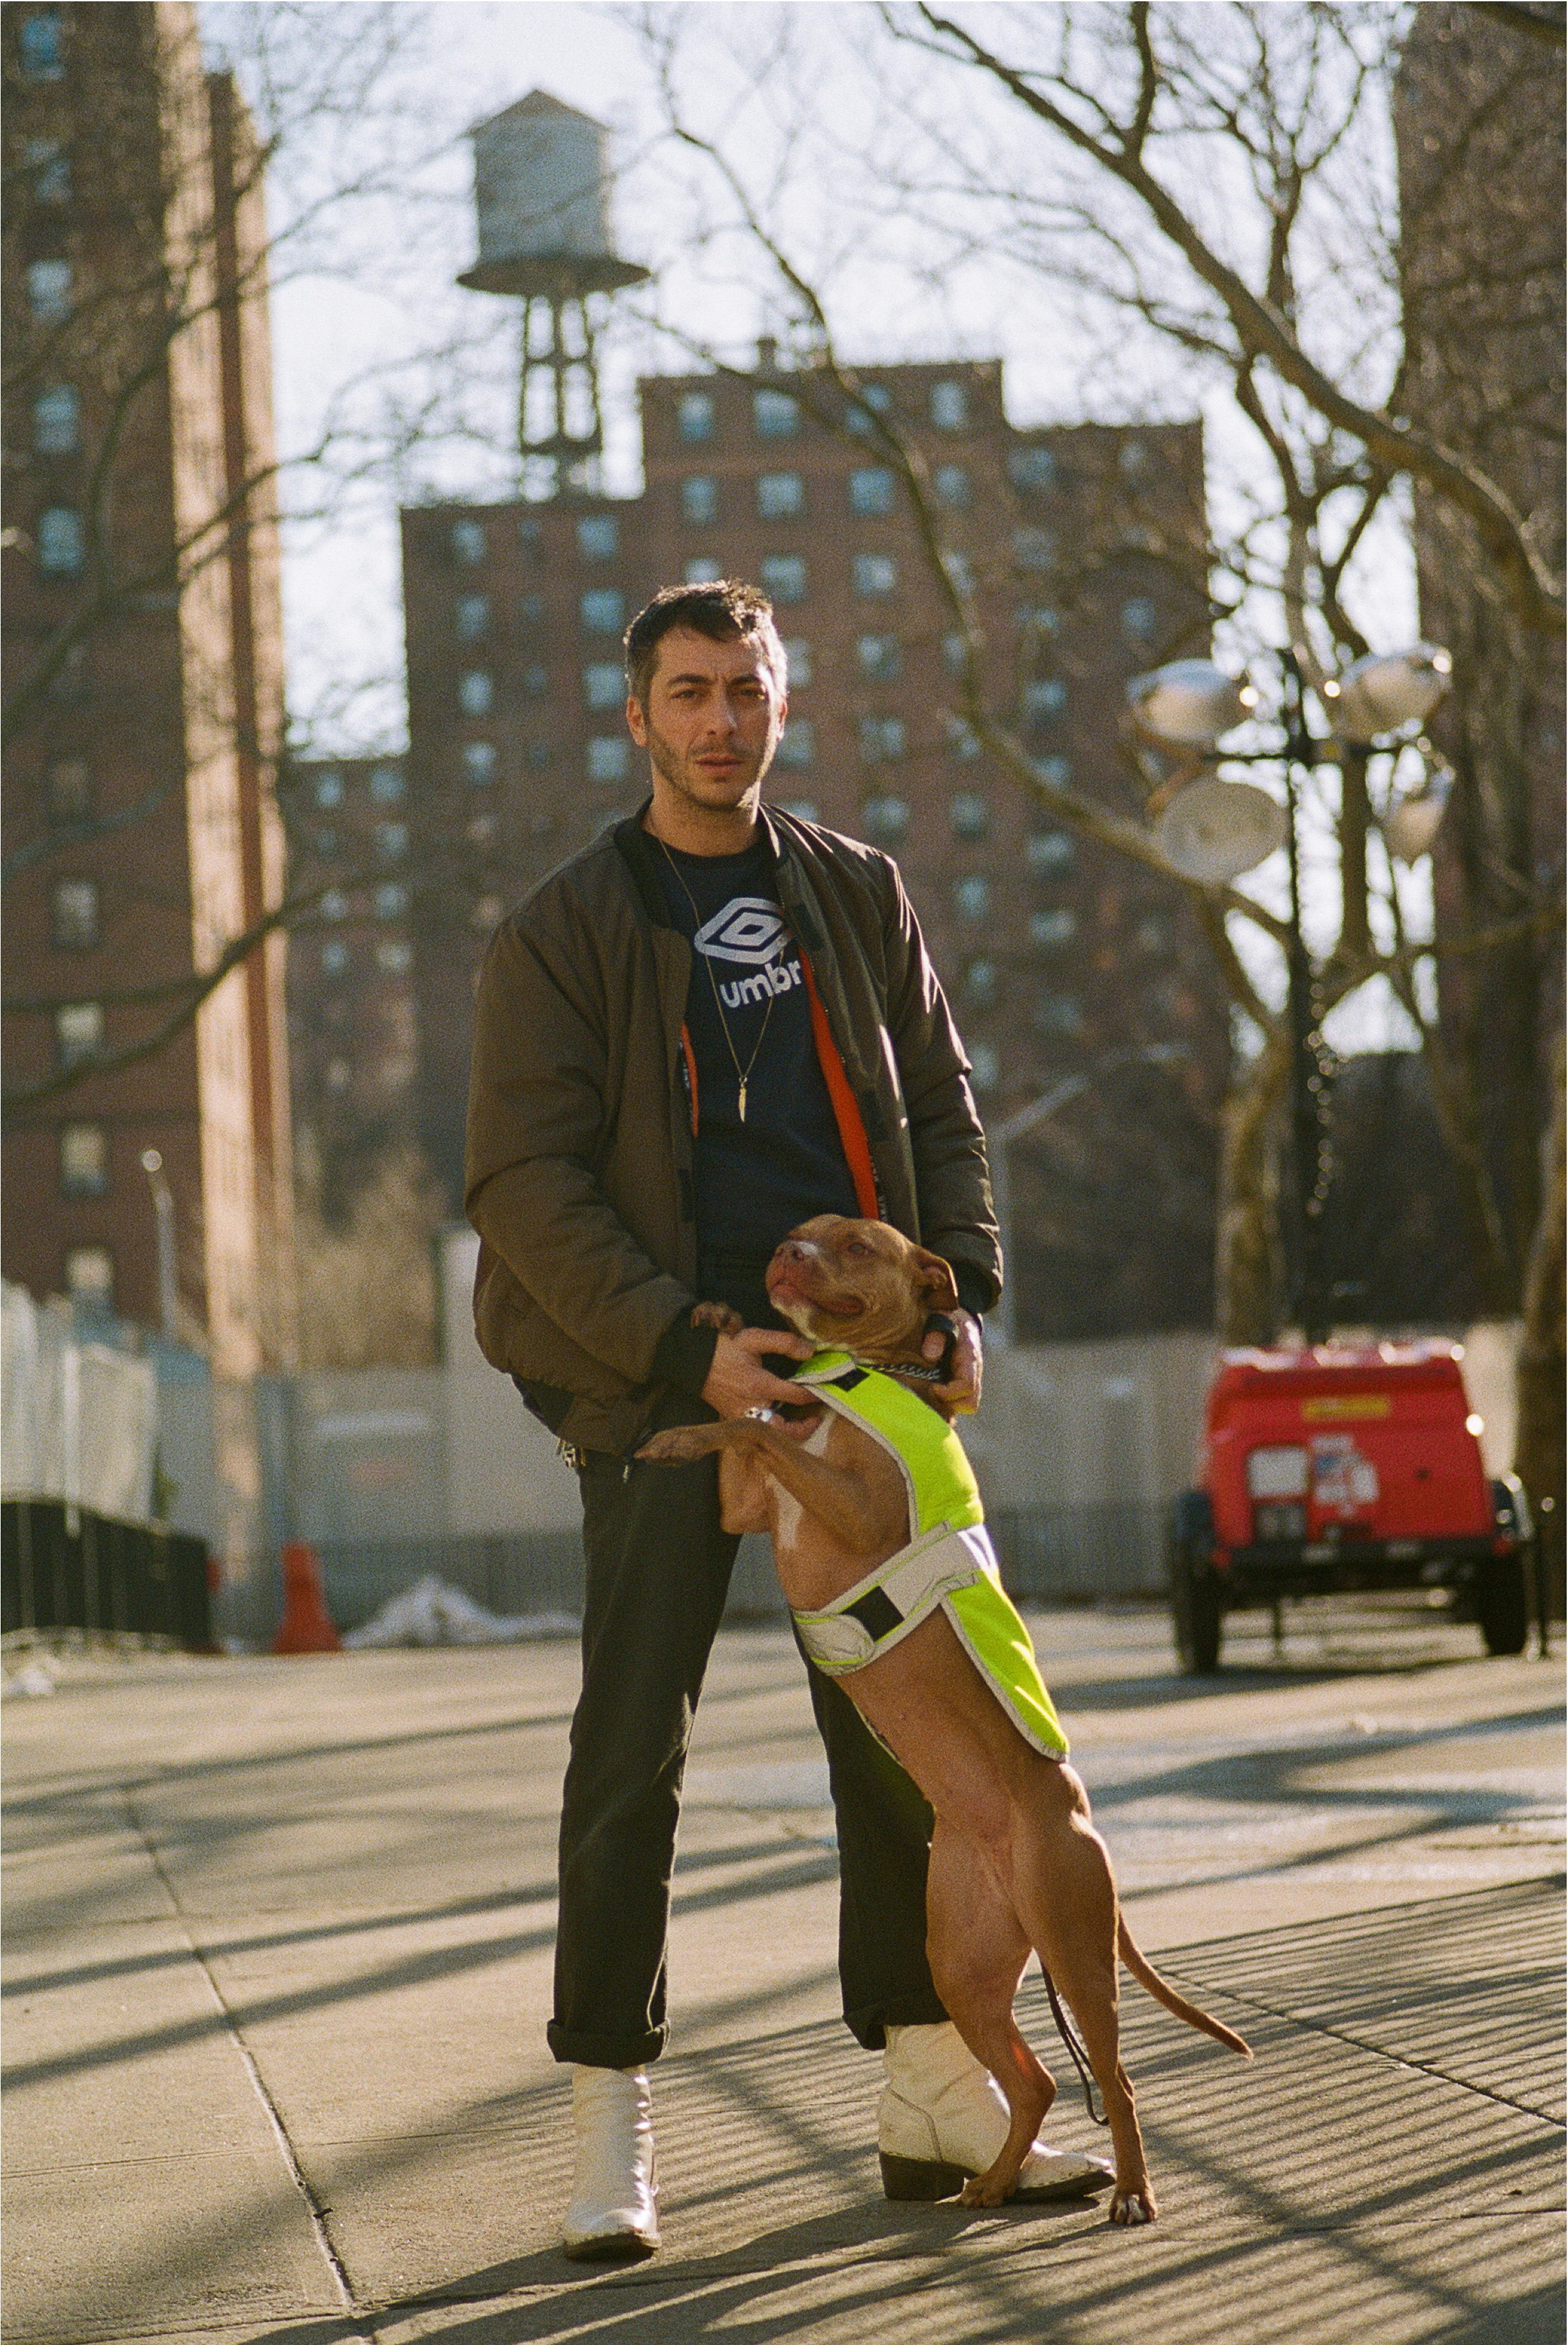 Designer Alessandro Simonetti and Cleo, the dog, find their place in Alphabet City. Simonetti wears U.P.W.W.’s reversible bomber from FW18, an Umbro sweatshirt, Ben Davis pants, and custom boots from Premiata. Cleo rocks the Utility-Pro collar.